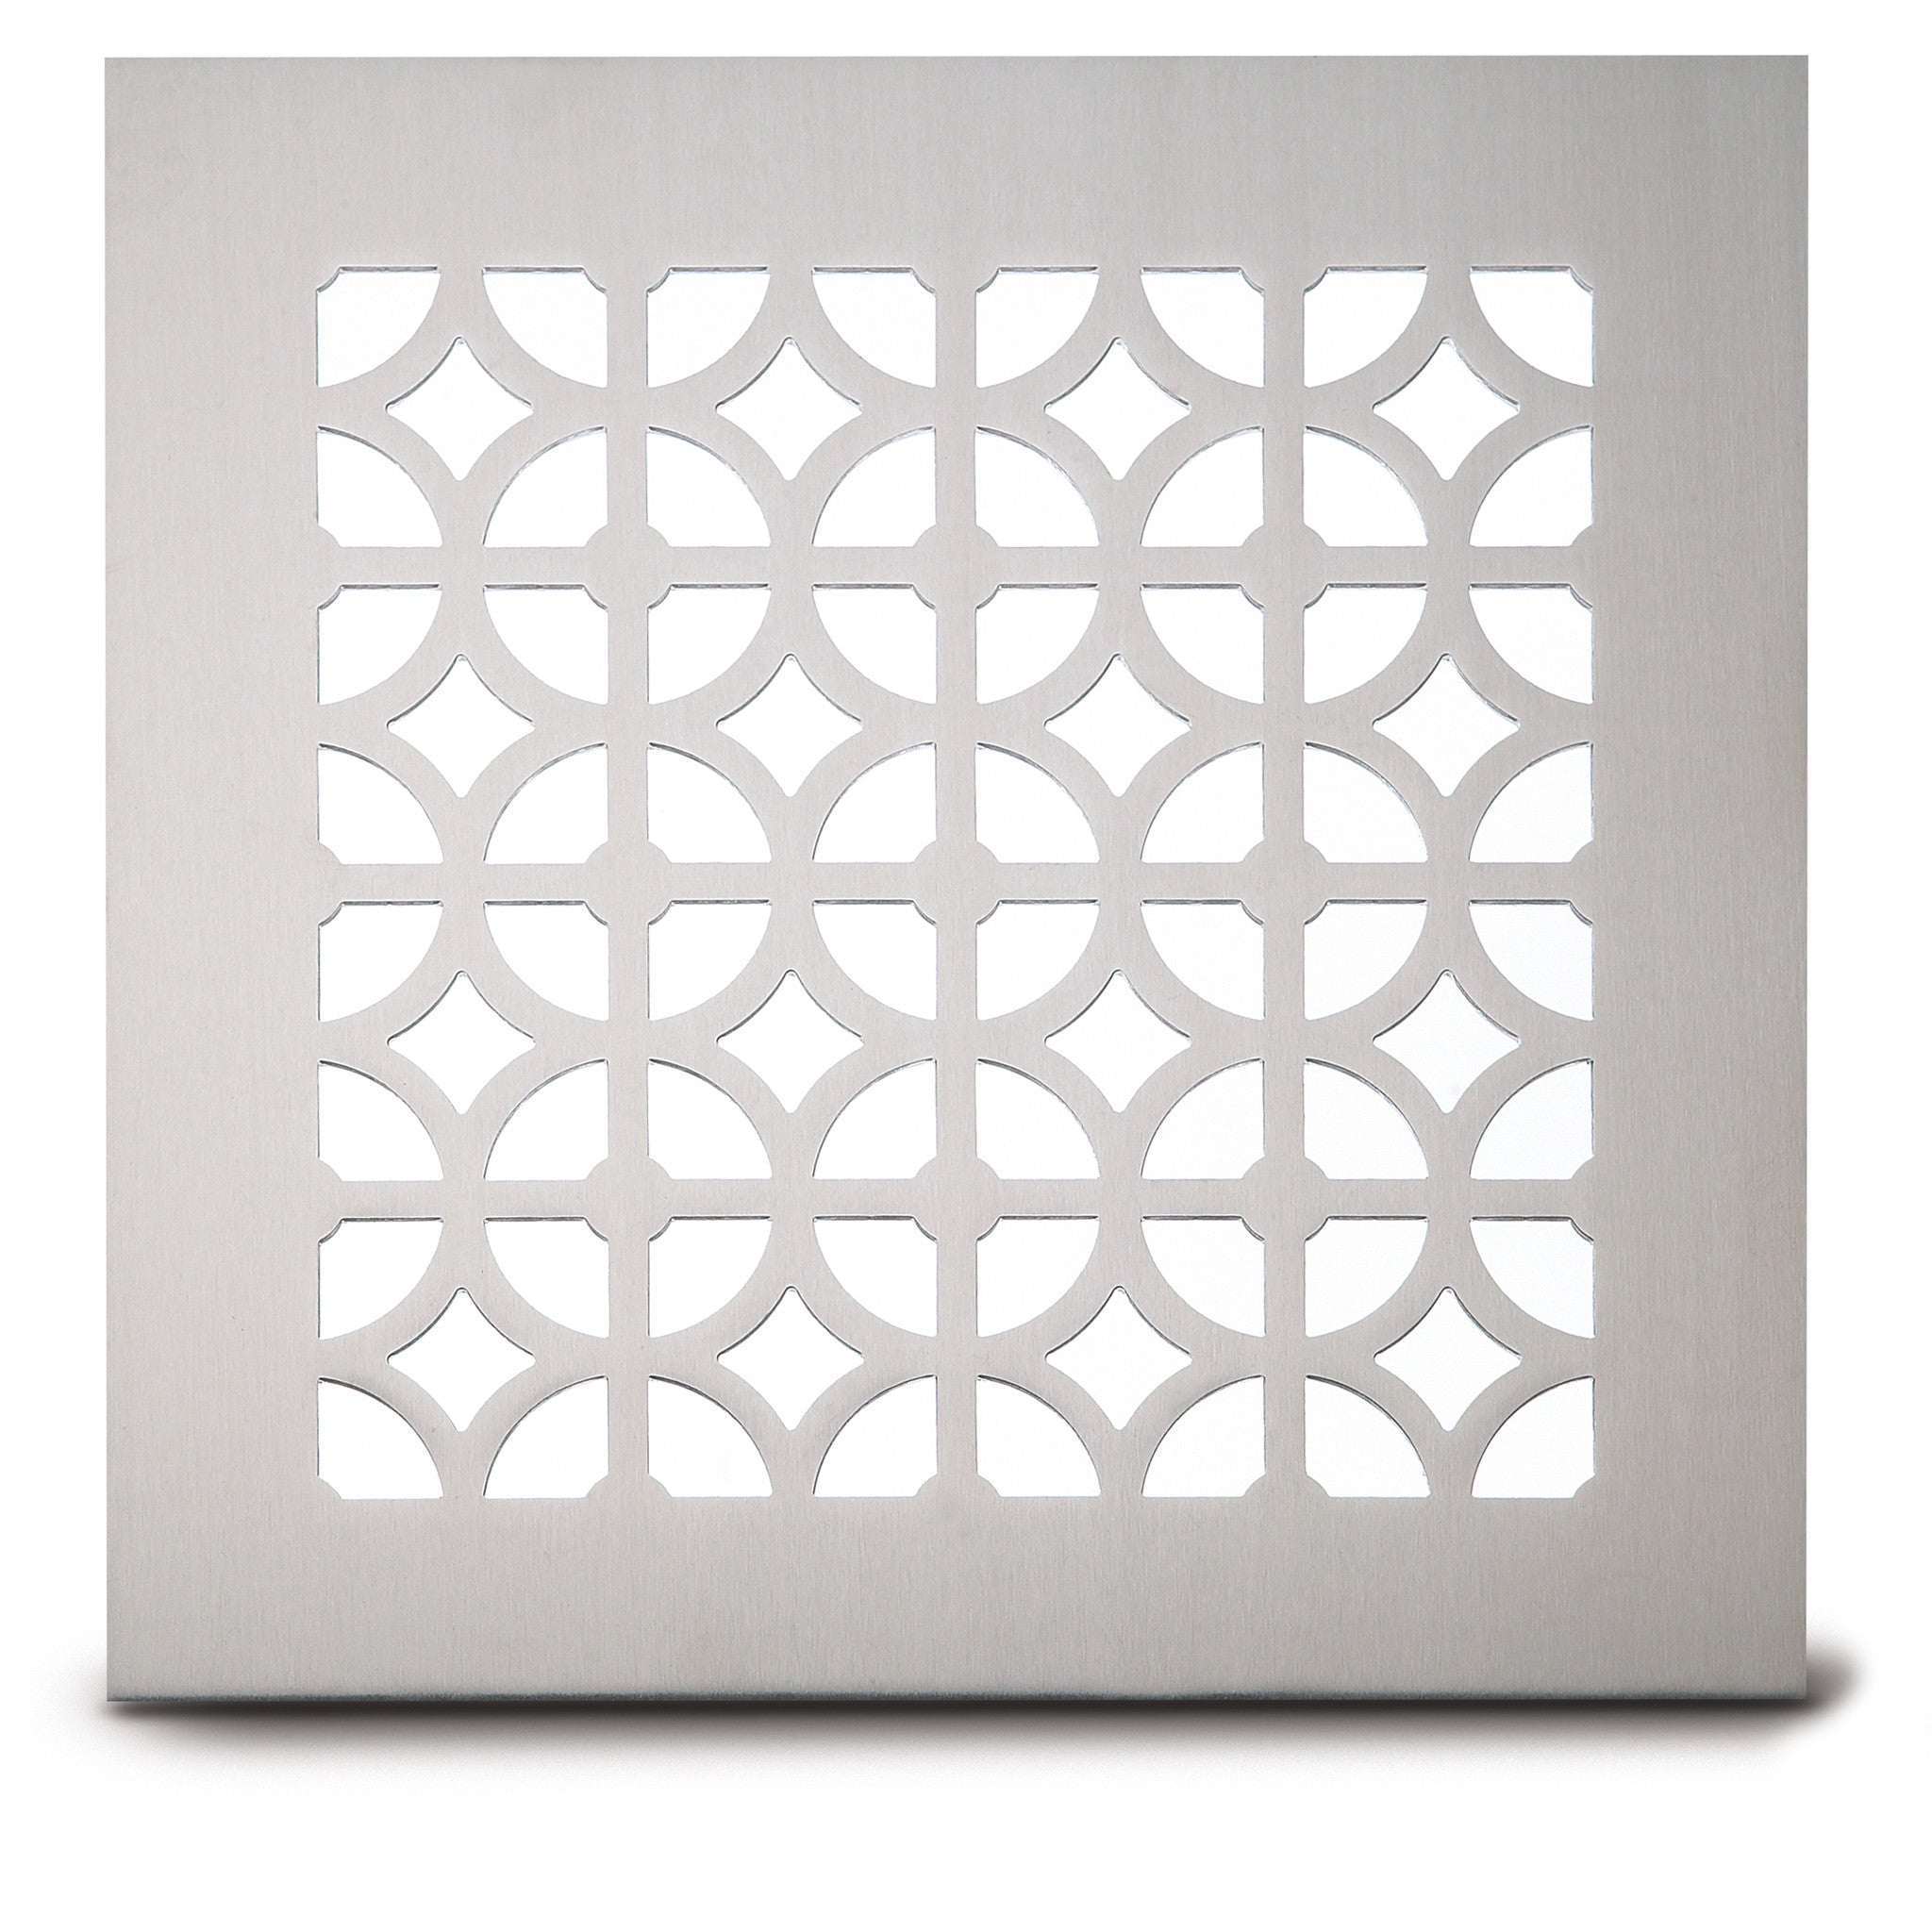 211 Egyptian Perforated Grille: 2” pattern - 55% open area